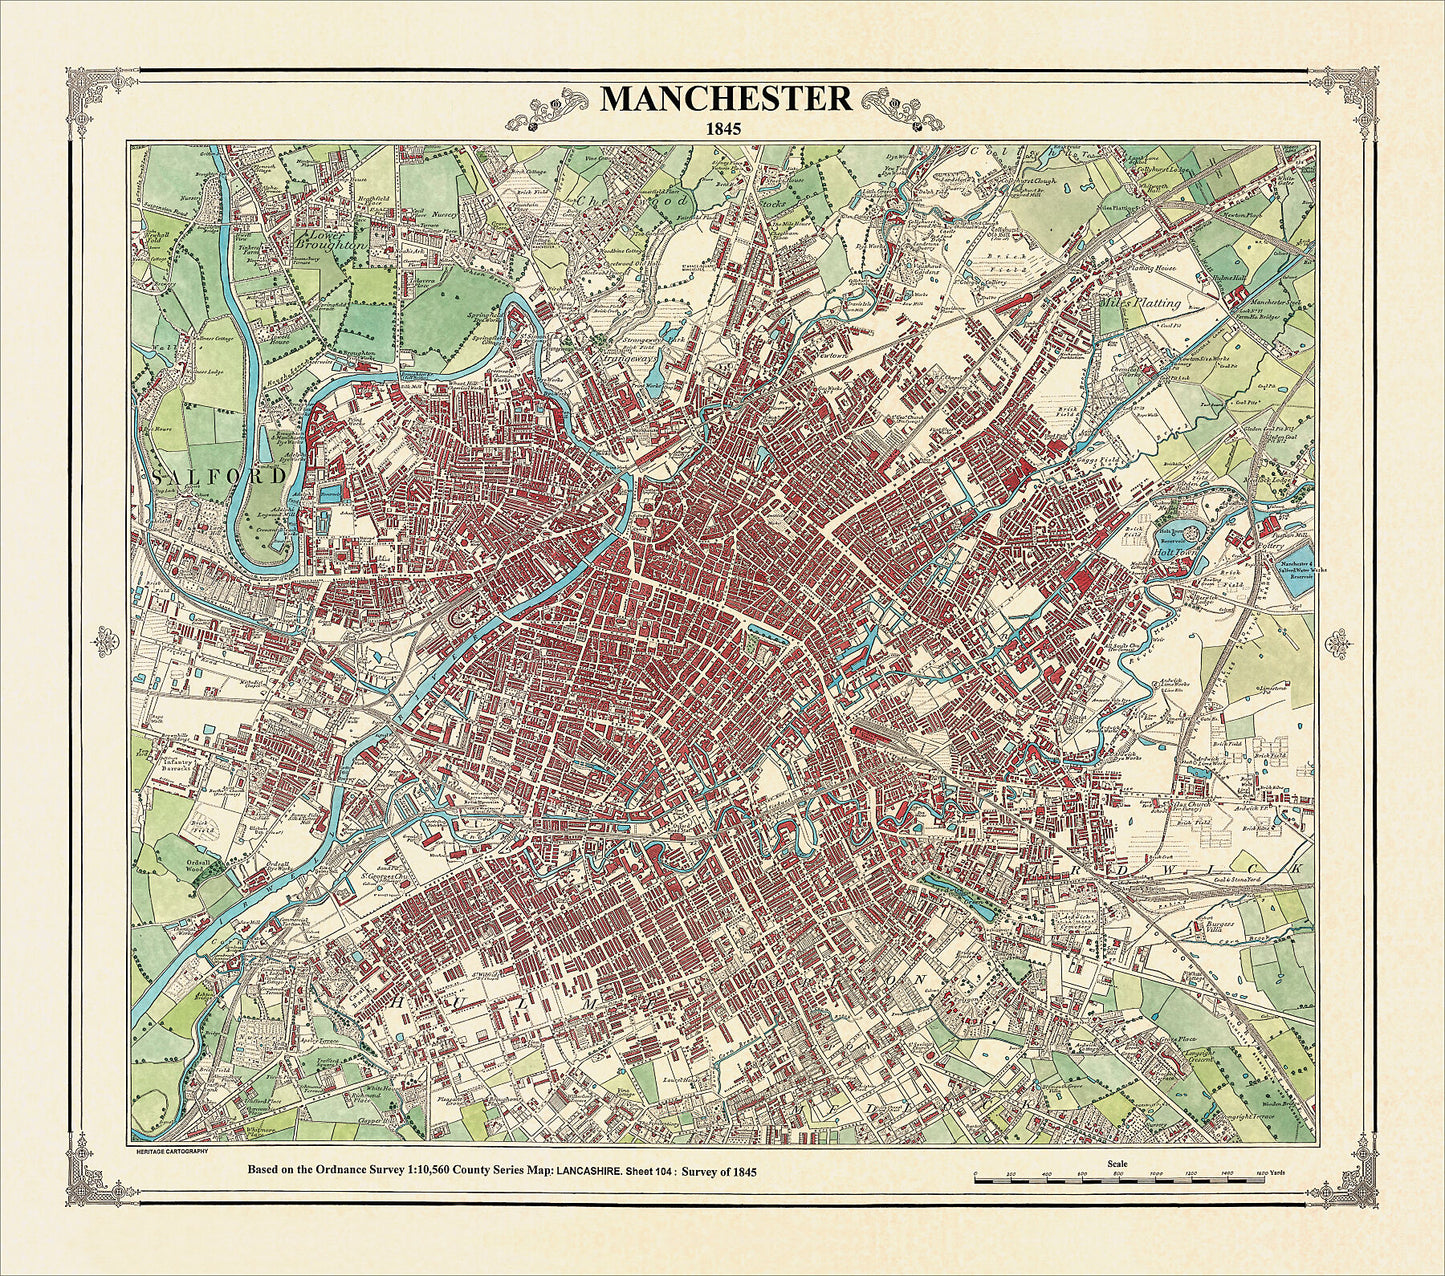 Coloured Victorian map of Manchester in 1845 by Peter J Adams of Heritage Cartography